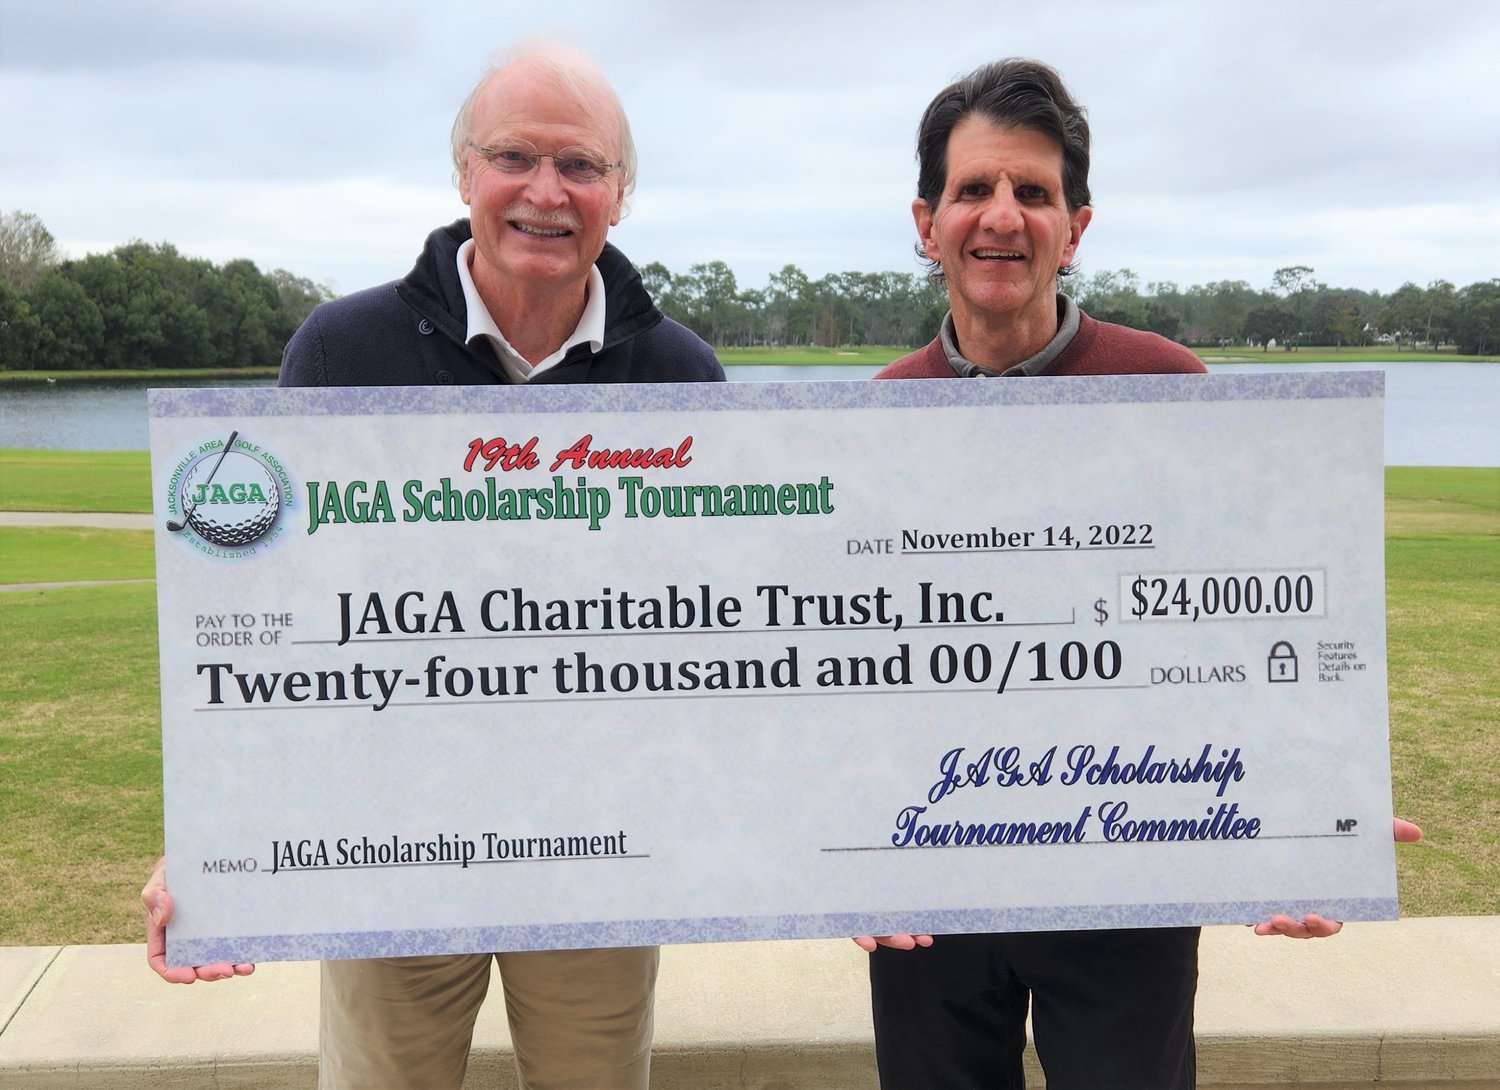 JAGA Scholarship Golf Classic chairman Michael McKenny, left, and JAGA president Jeff Adams 
unveil a check in the amount of $24,000 to benefit the JAGA scholarship program.